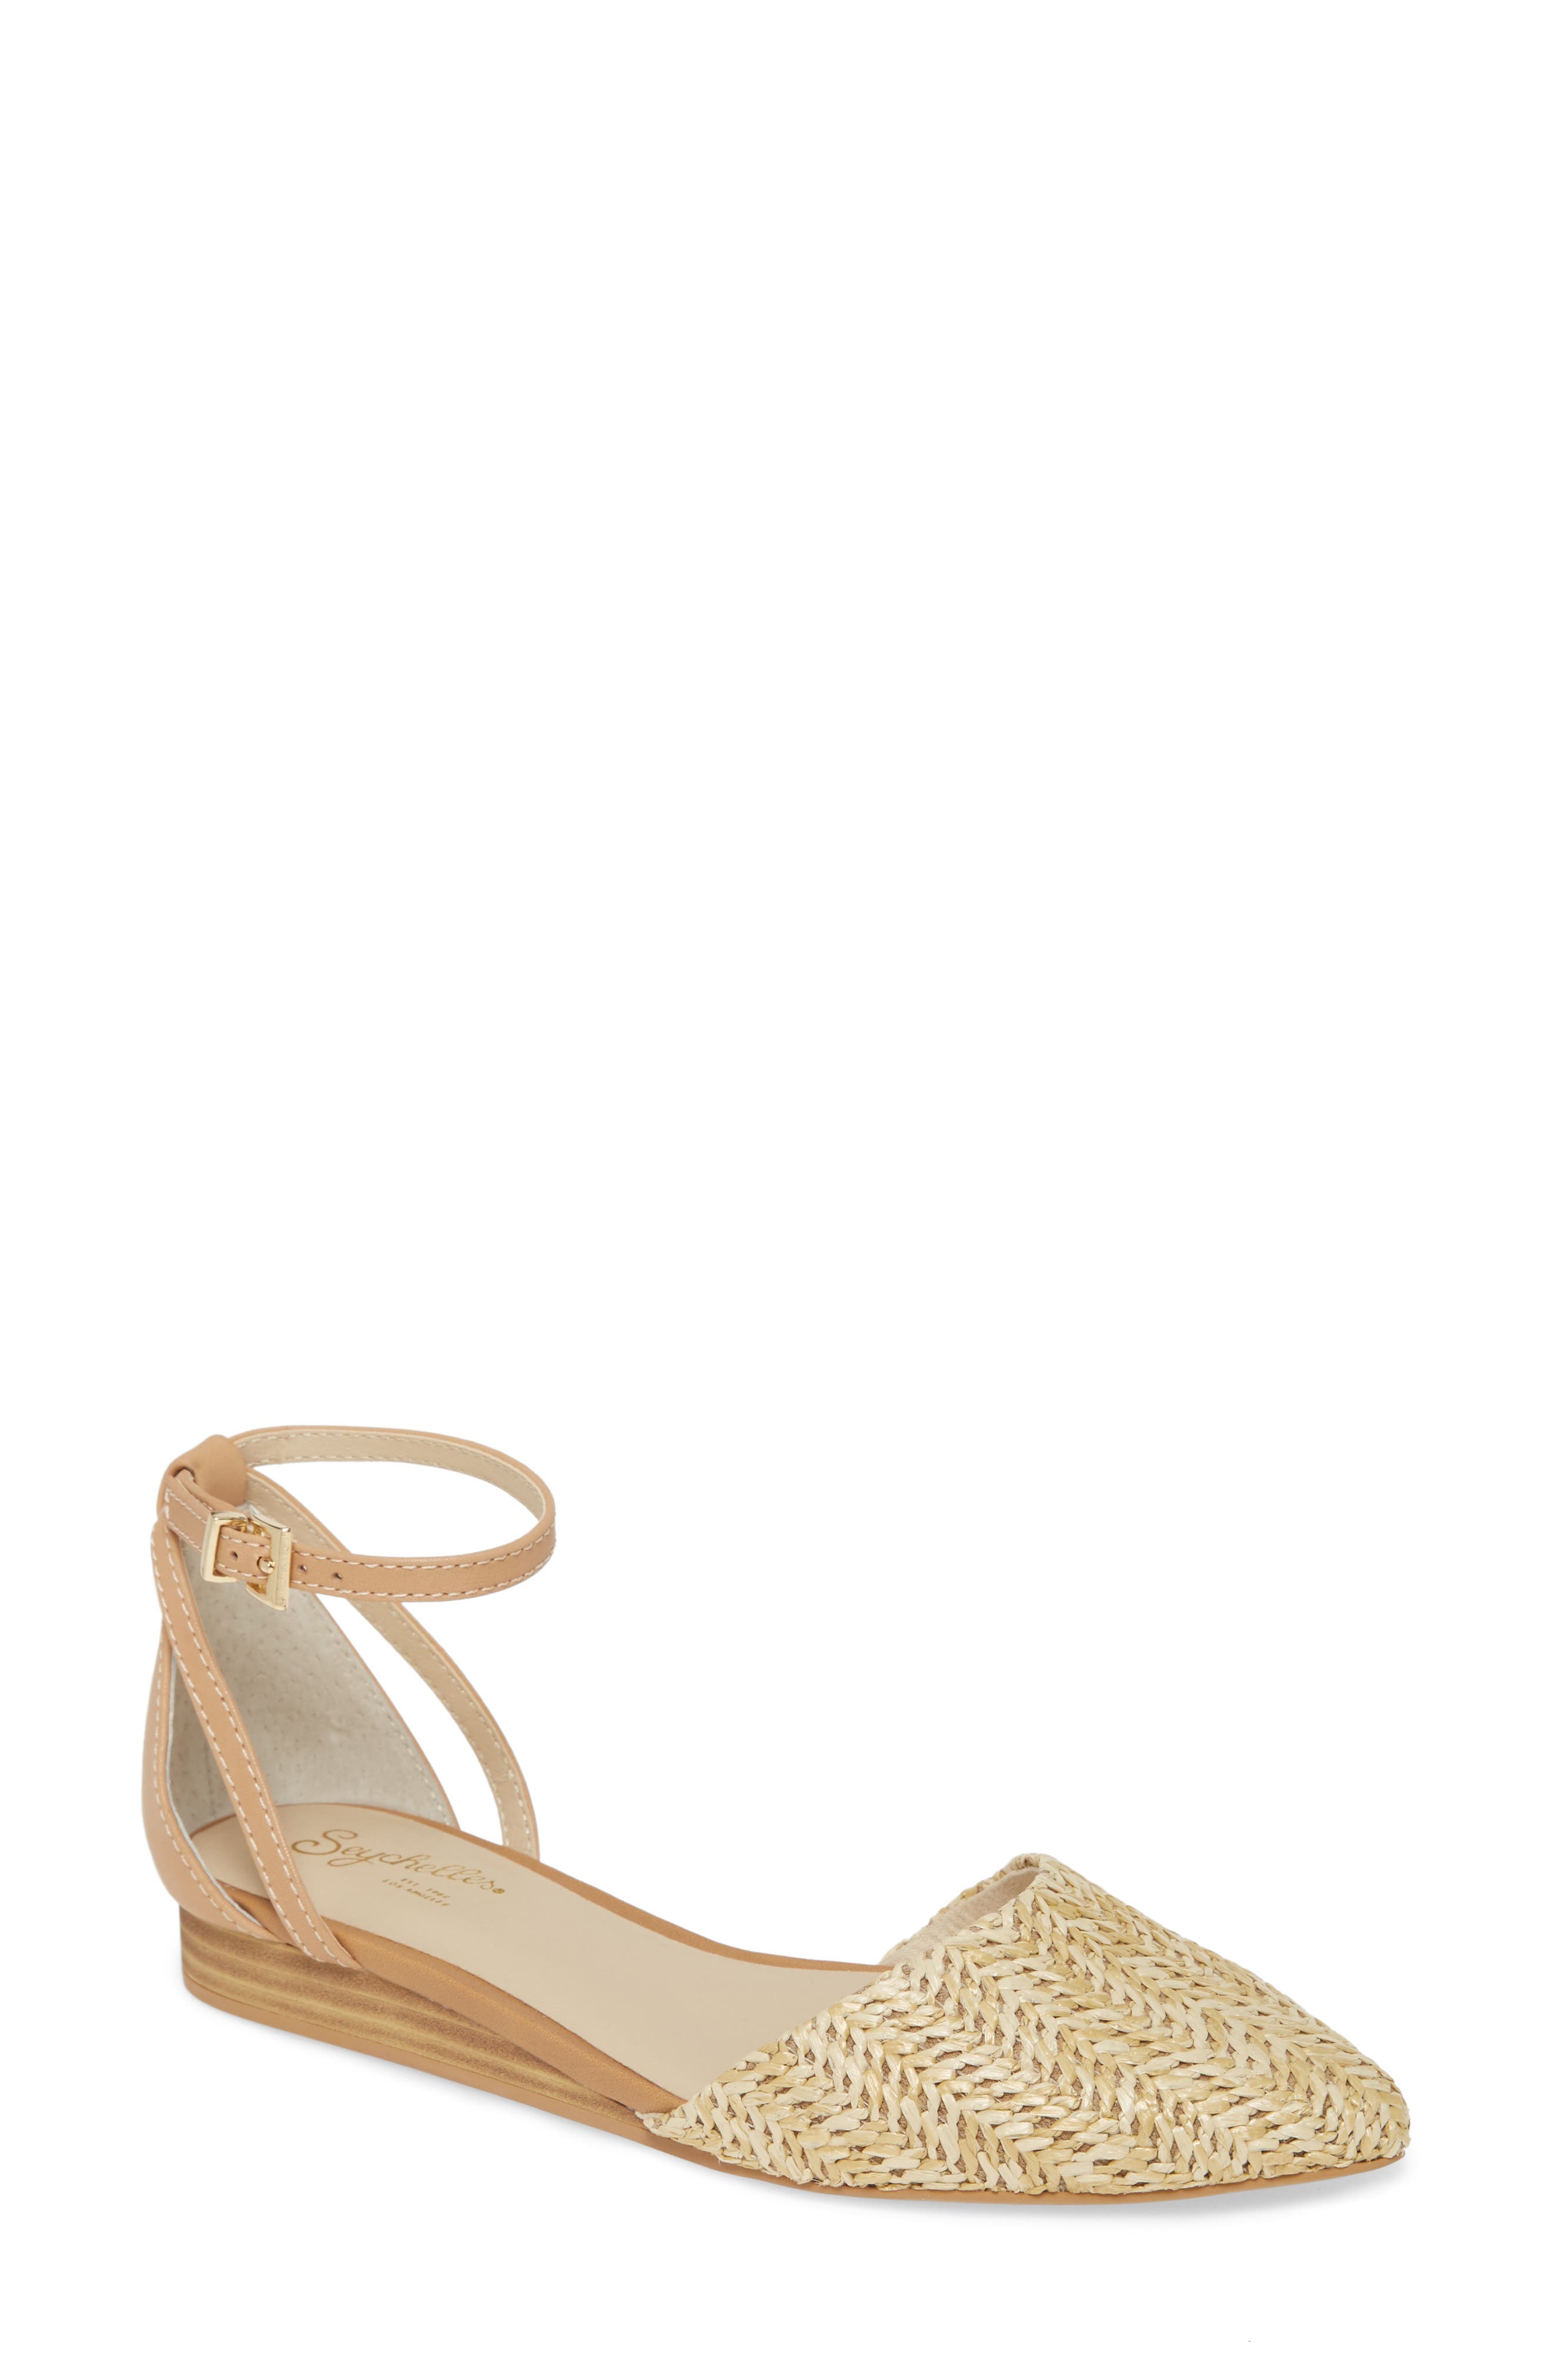 seychelles ankle strap flats